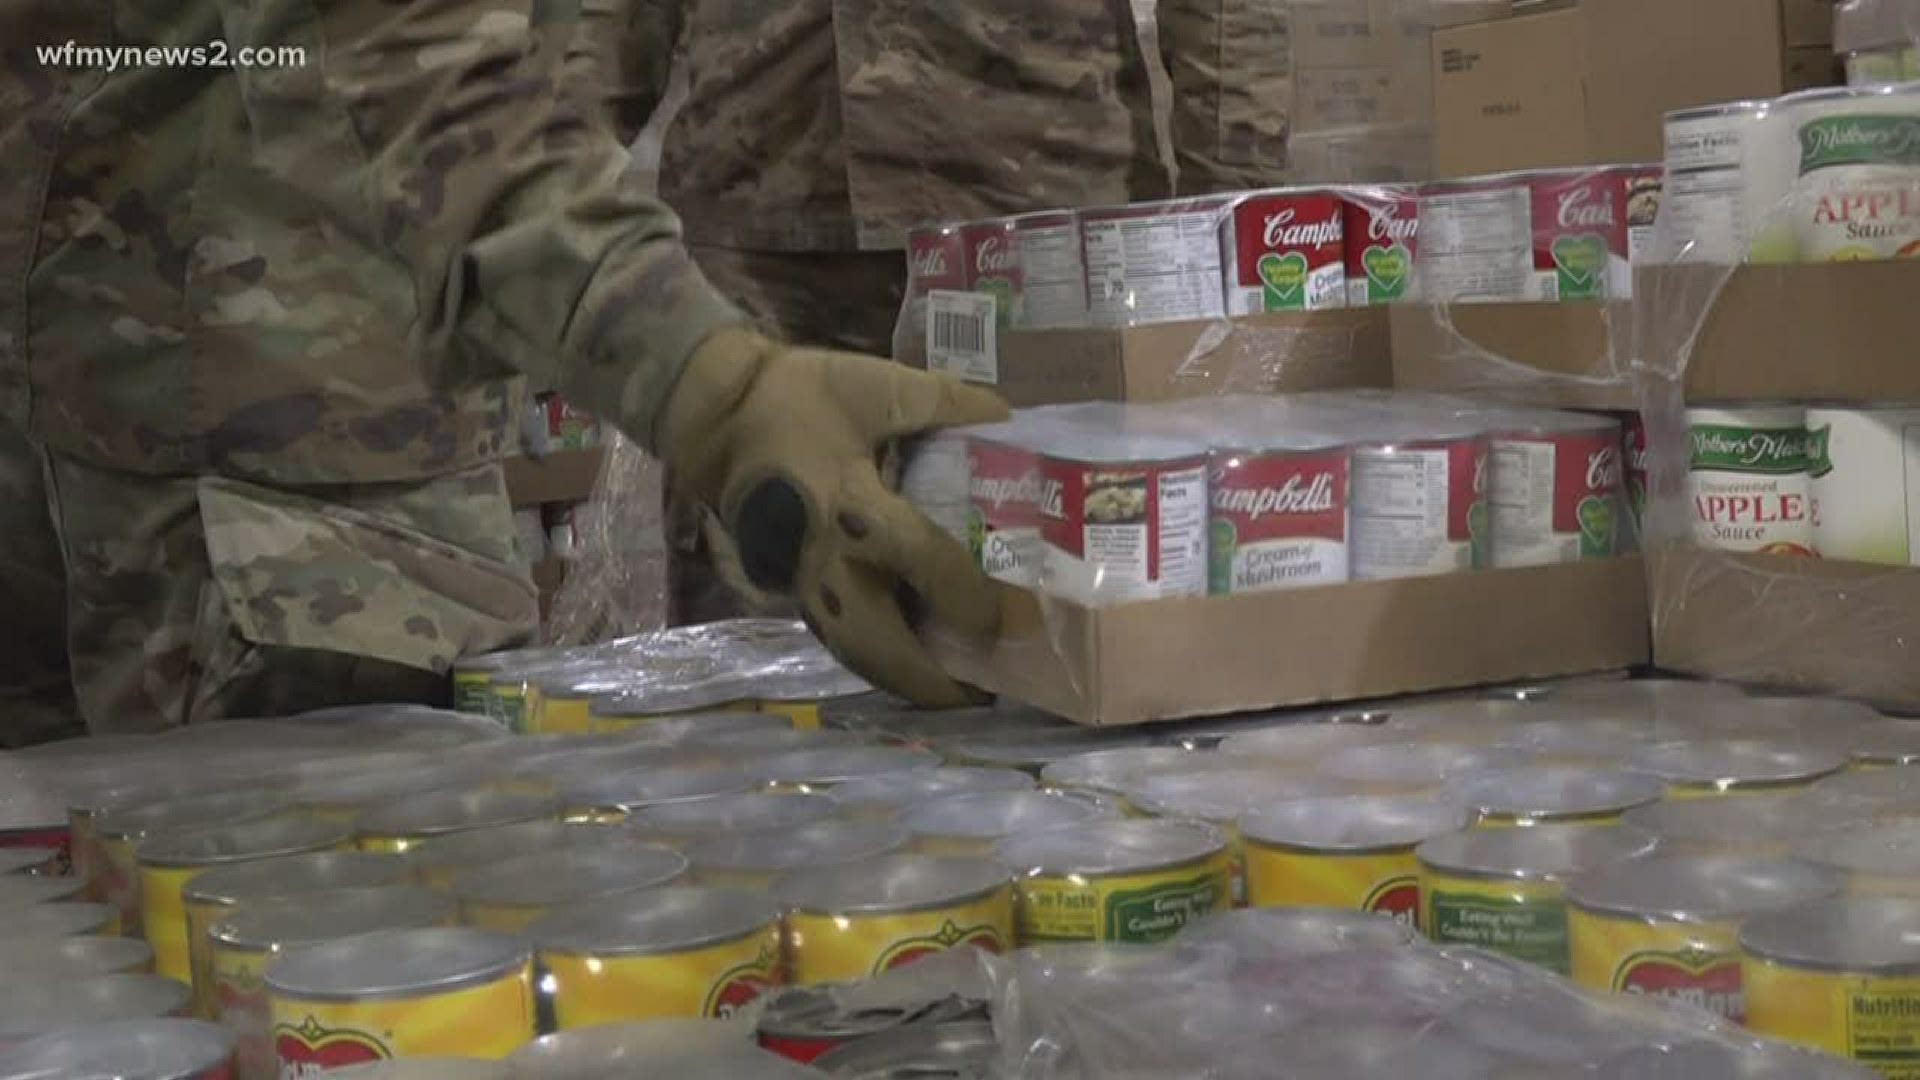 Volunteers with Second Harvest Food Bank have had to step away because of coronavirus, but the National Guard is filling the void.